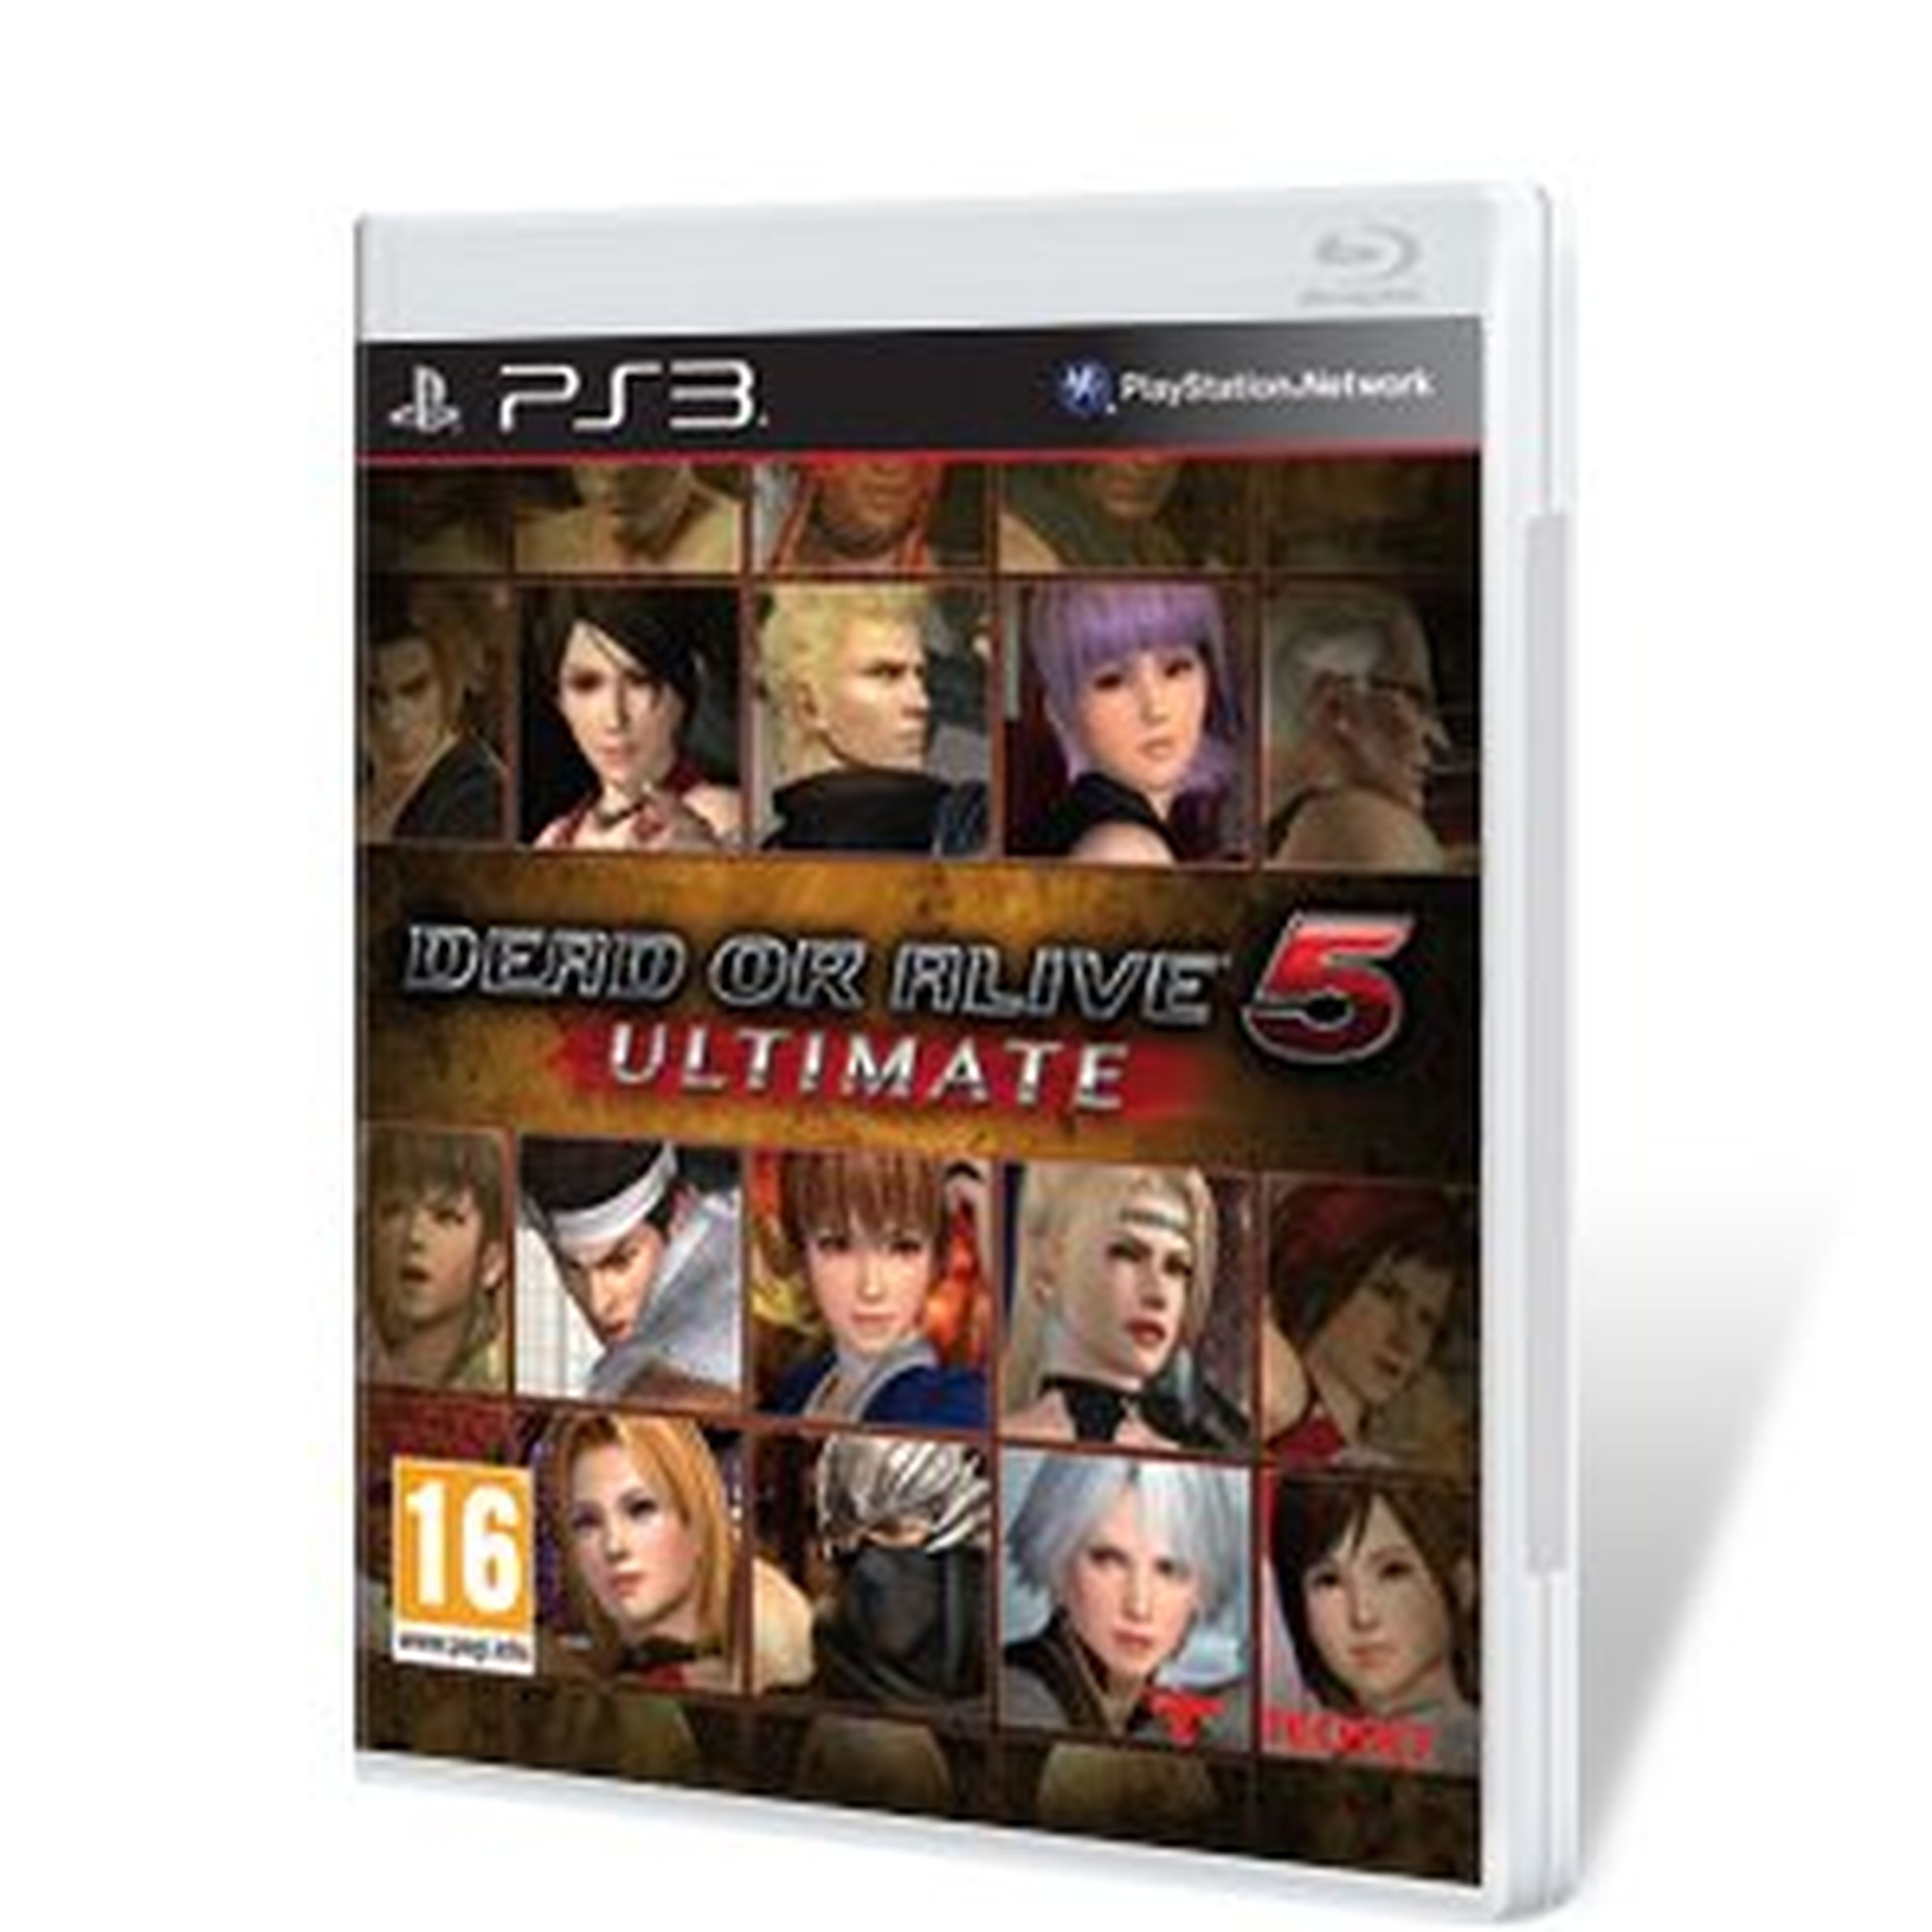 Dead or Alive 5 Ultimate para PS3